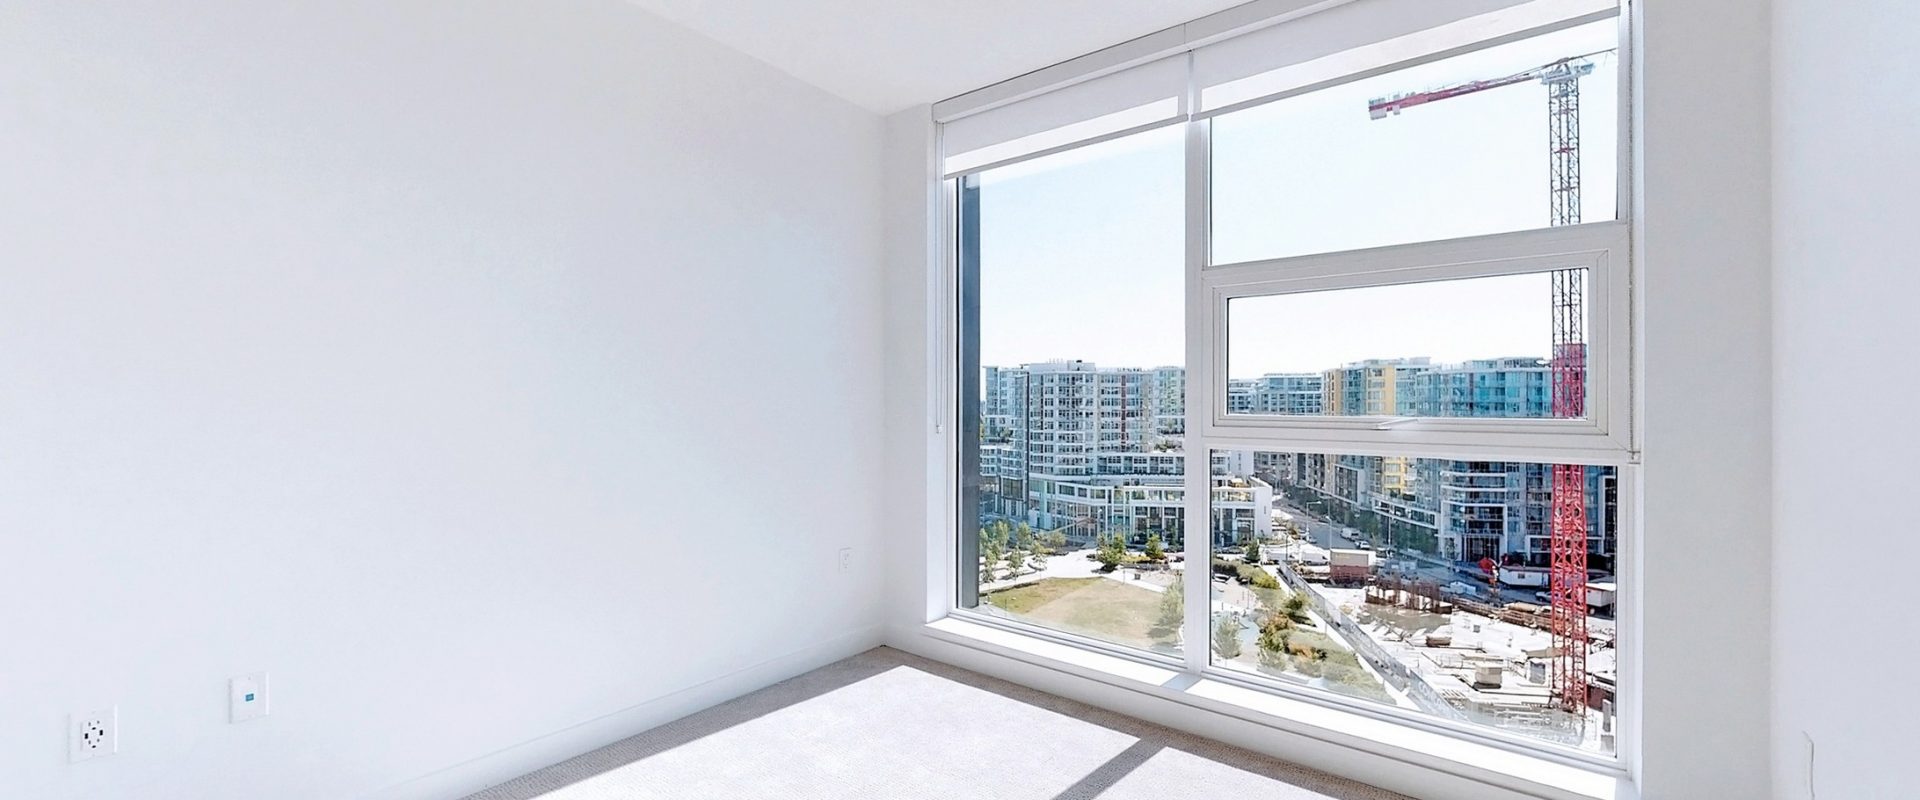 【Richmond】ViewStar! Brand New Apartment with City View